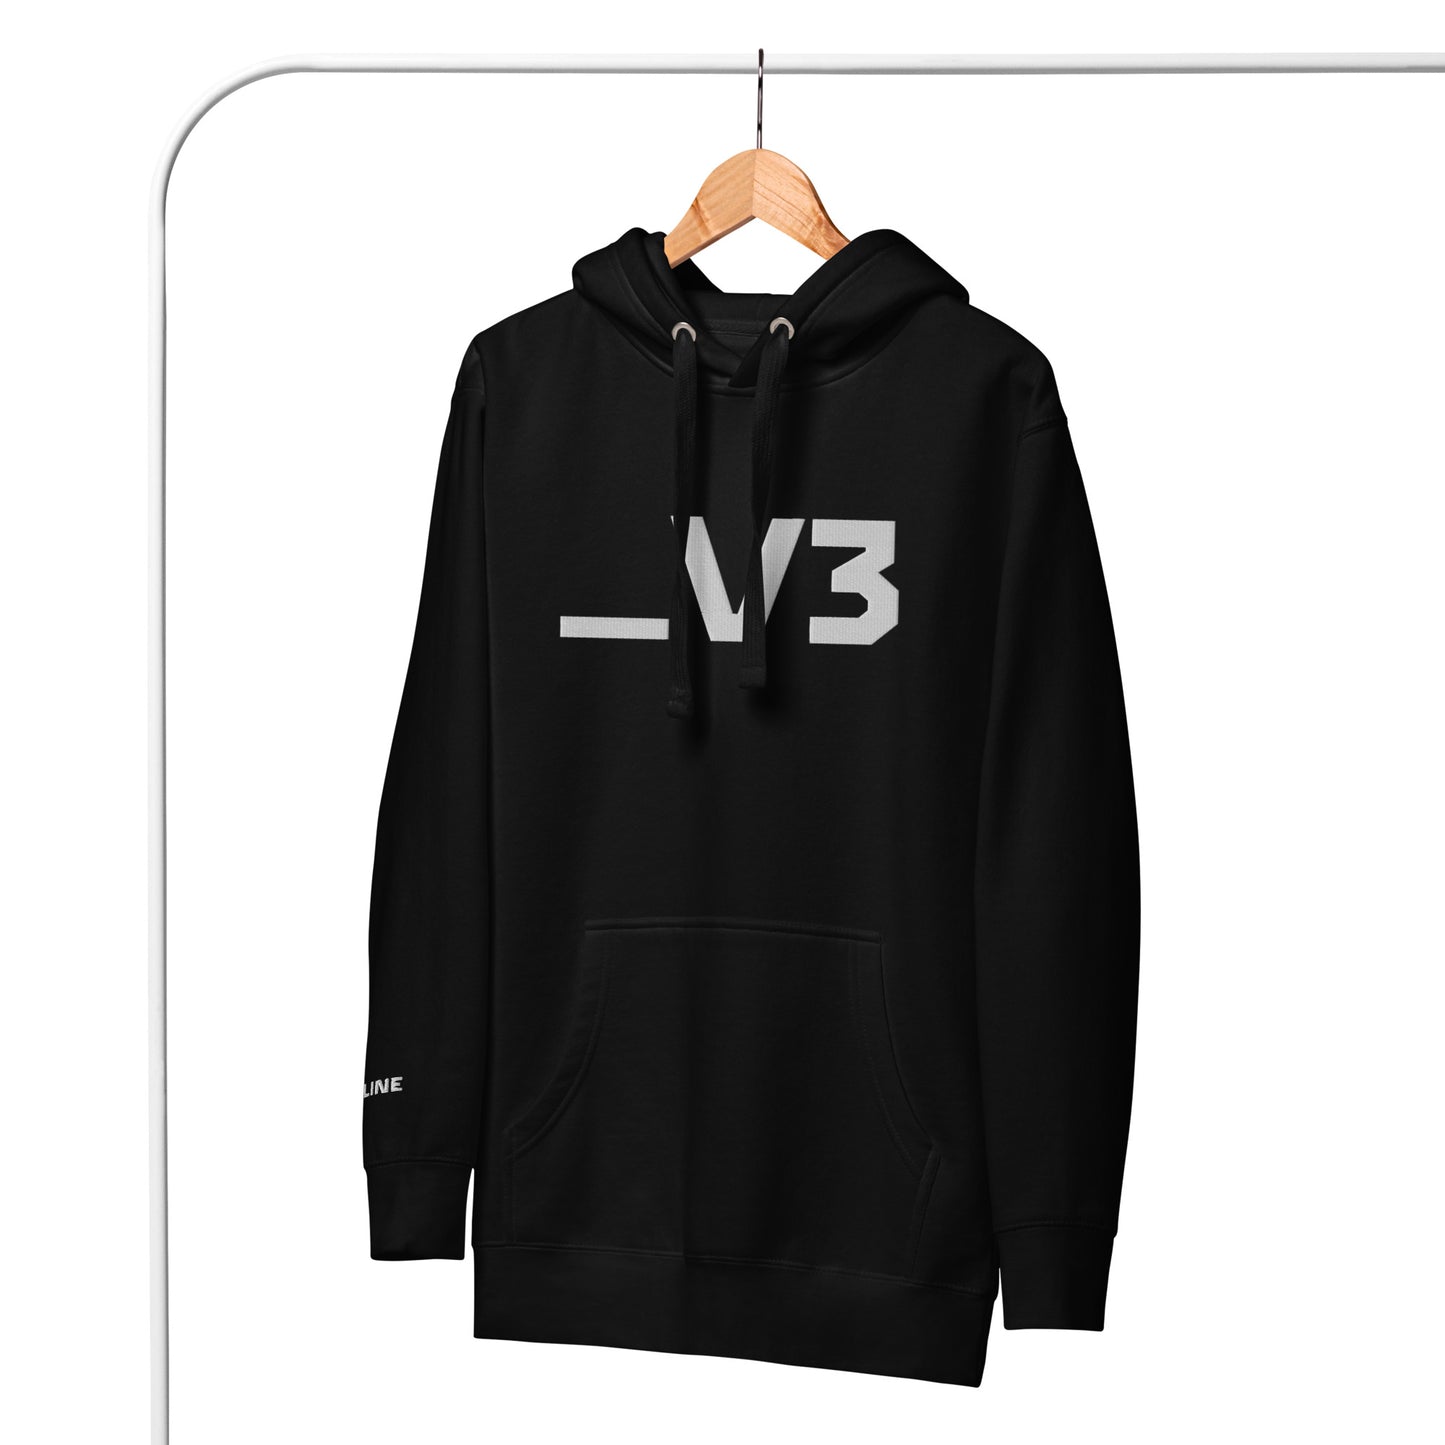 _V3 Large Embroidery Unisex Hoodie